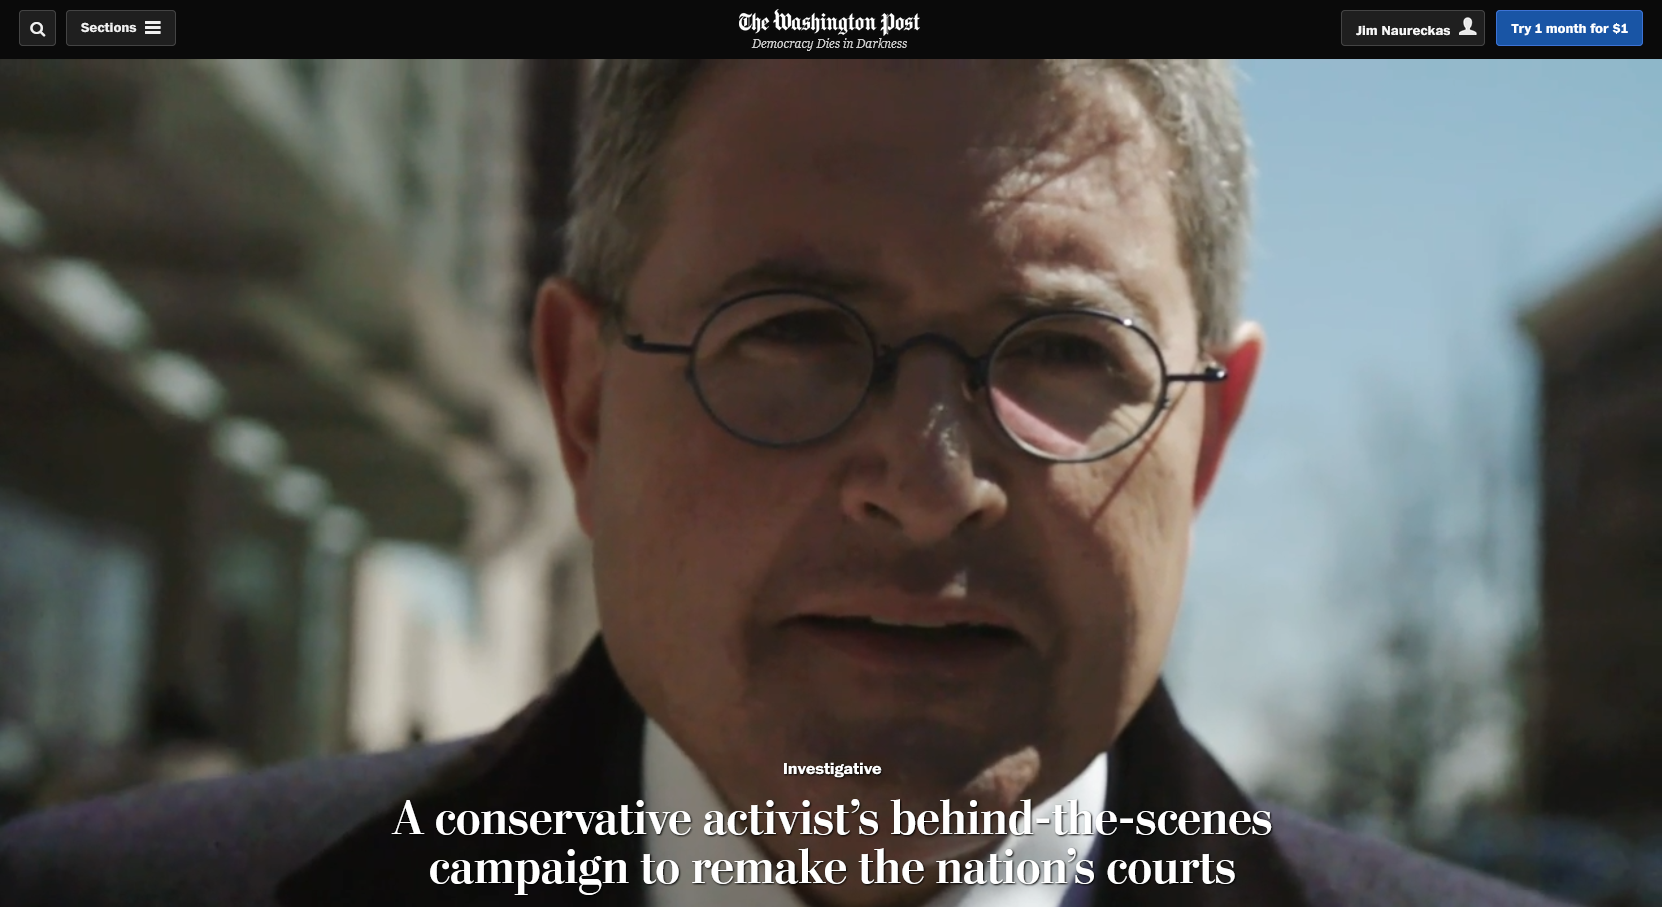 WaPo: A conservative activist’s behind-the-scenes campaign to remake the nation’s courts 